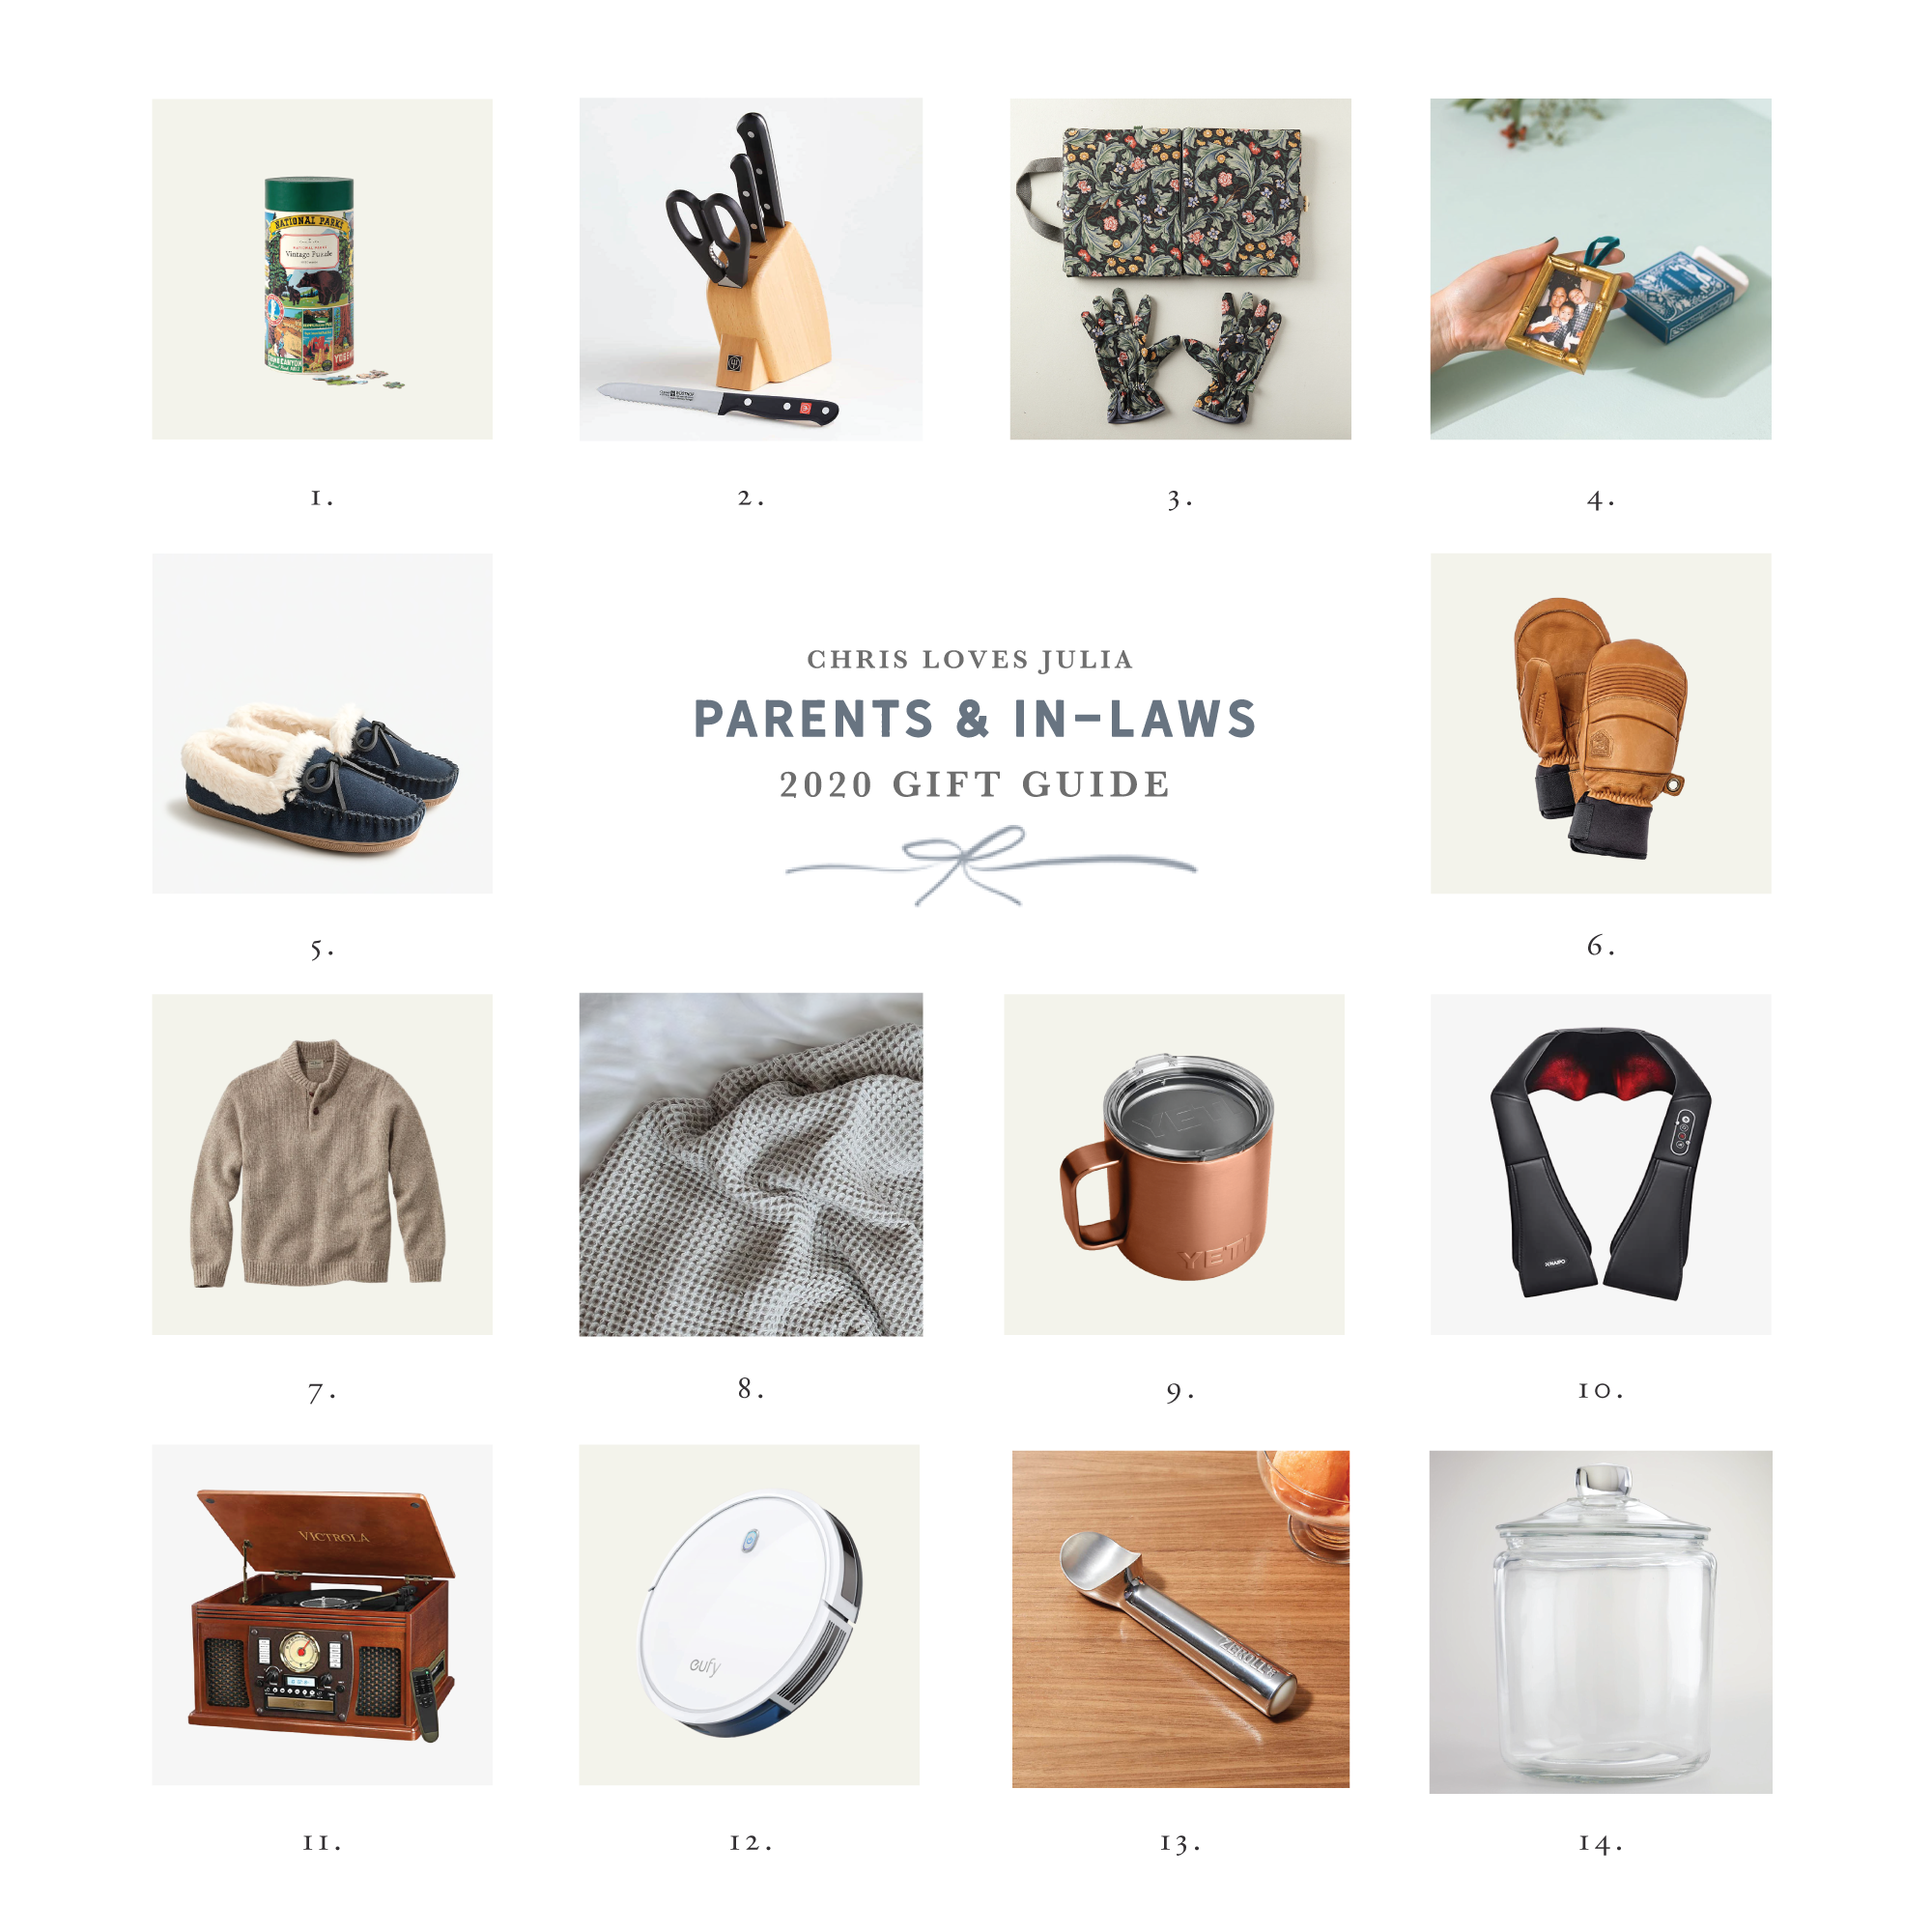 Experience and Subscription Gifts for Parents and In-Laws